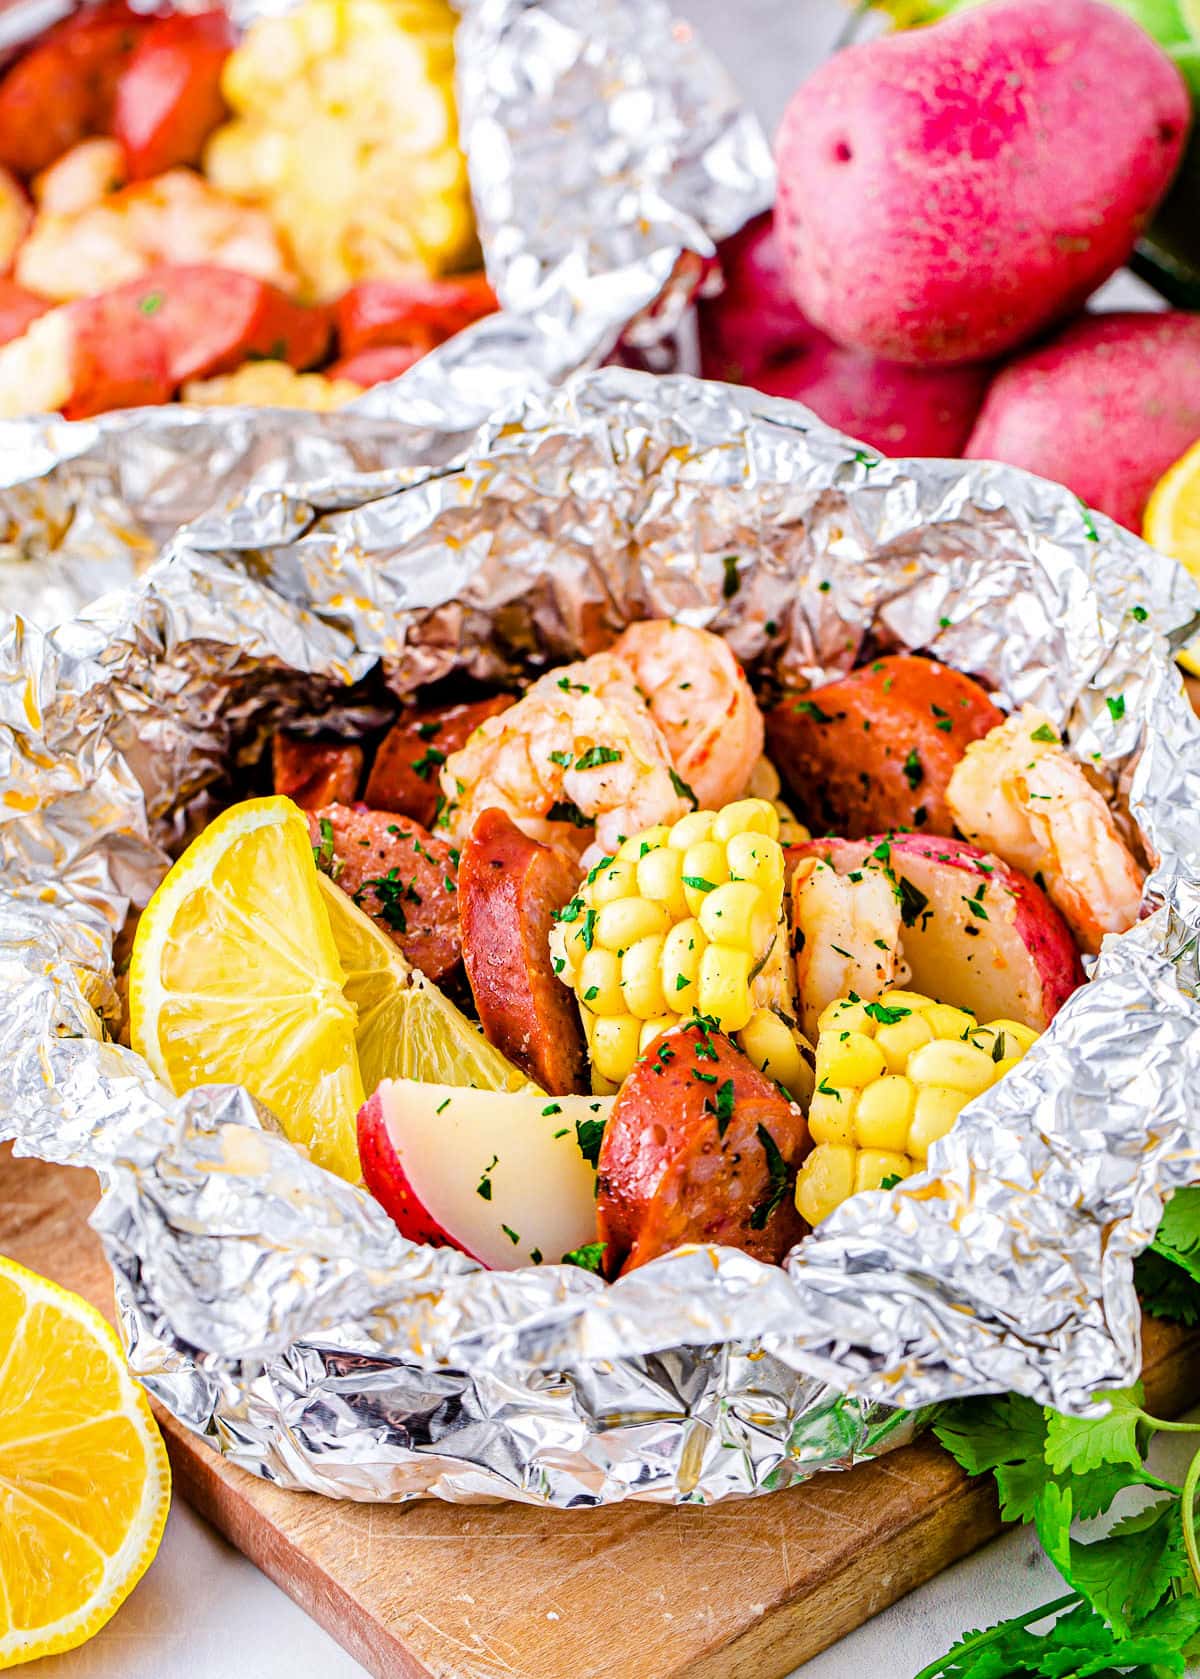 grilled shrimp boil made in foil packets with corn, sausage and shrimp.